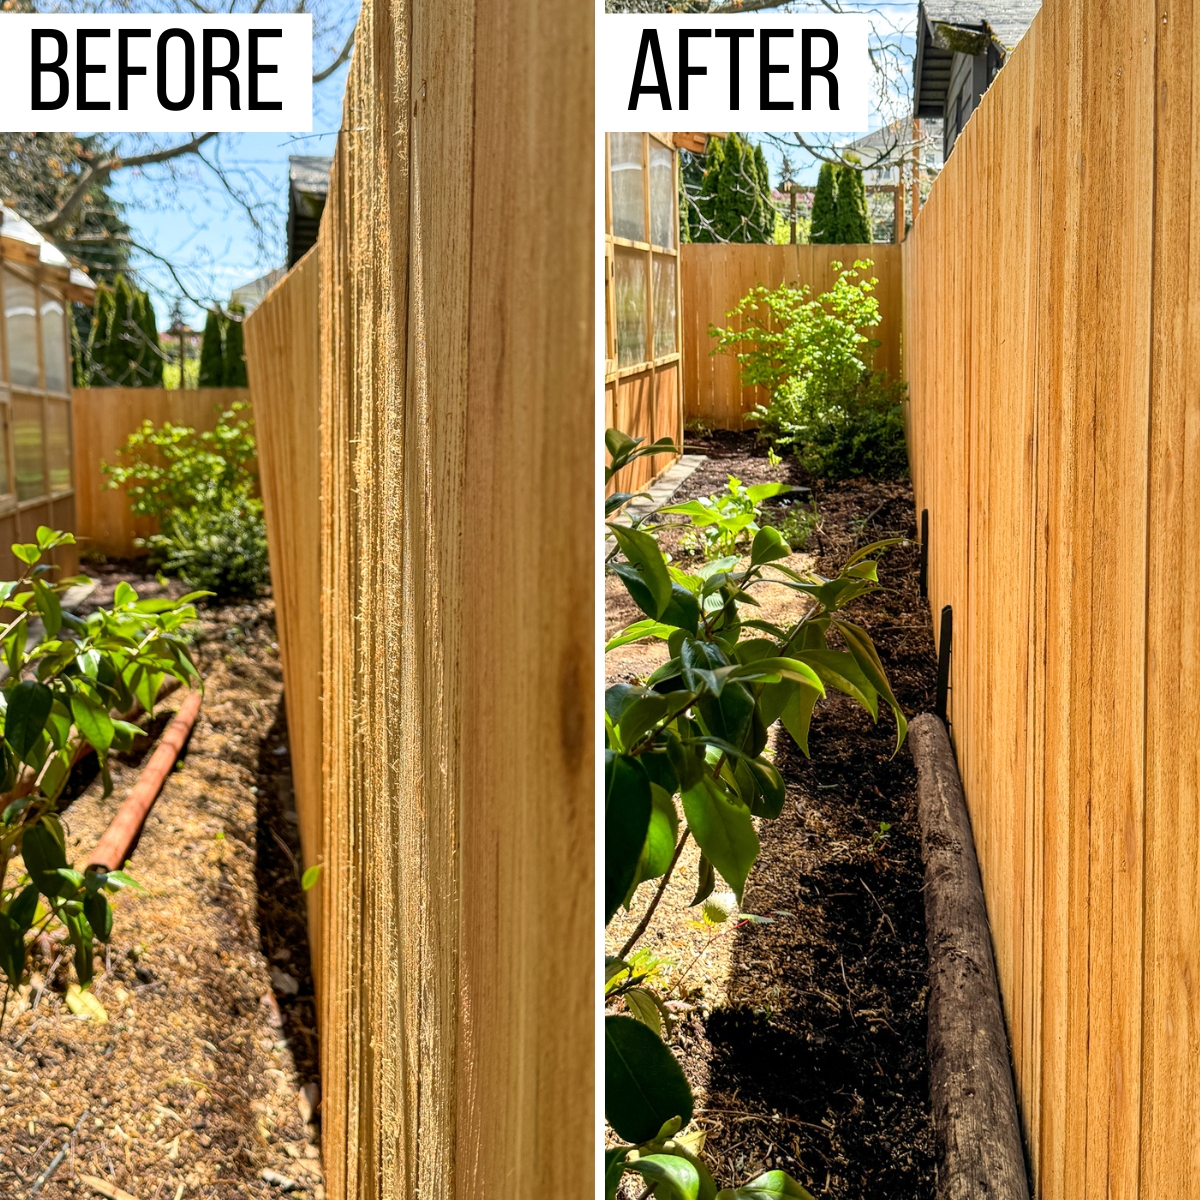 how to fix a leaning fence before and after photos